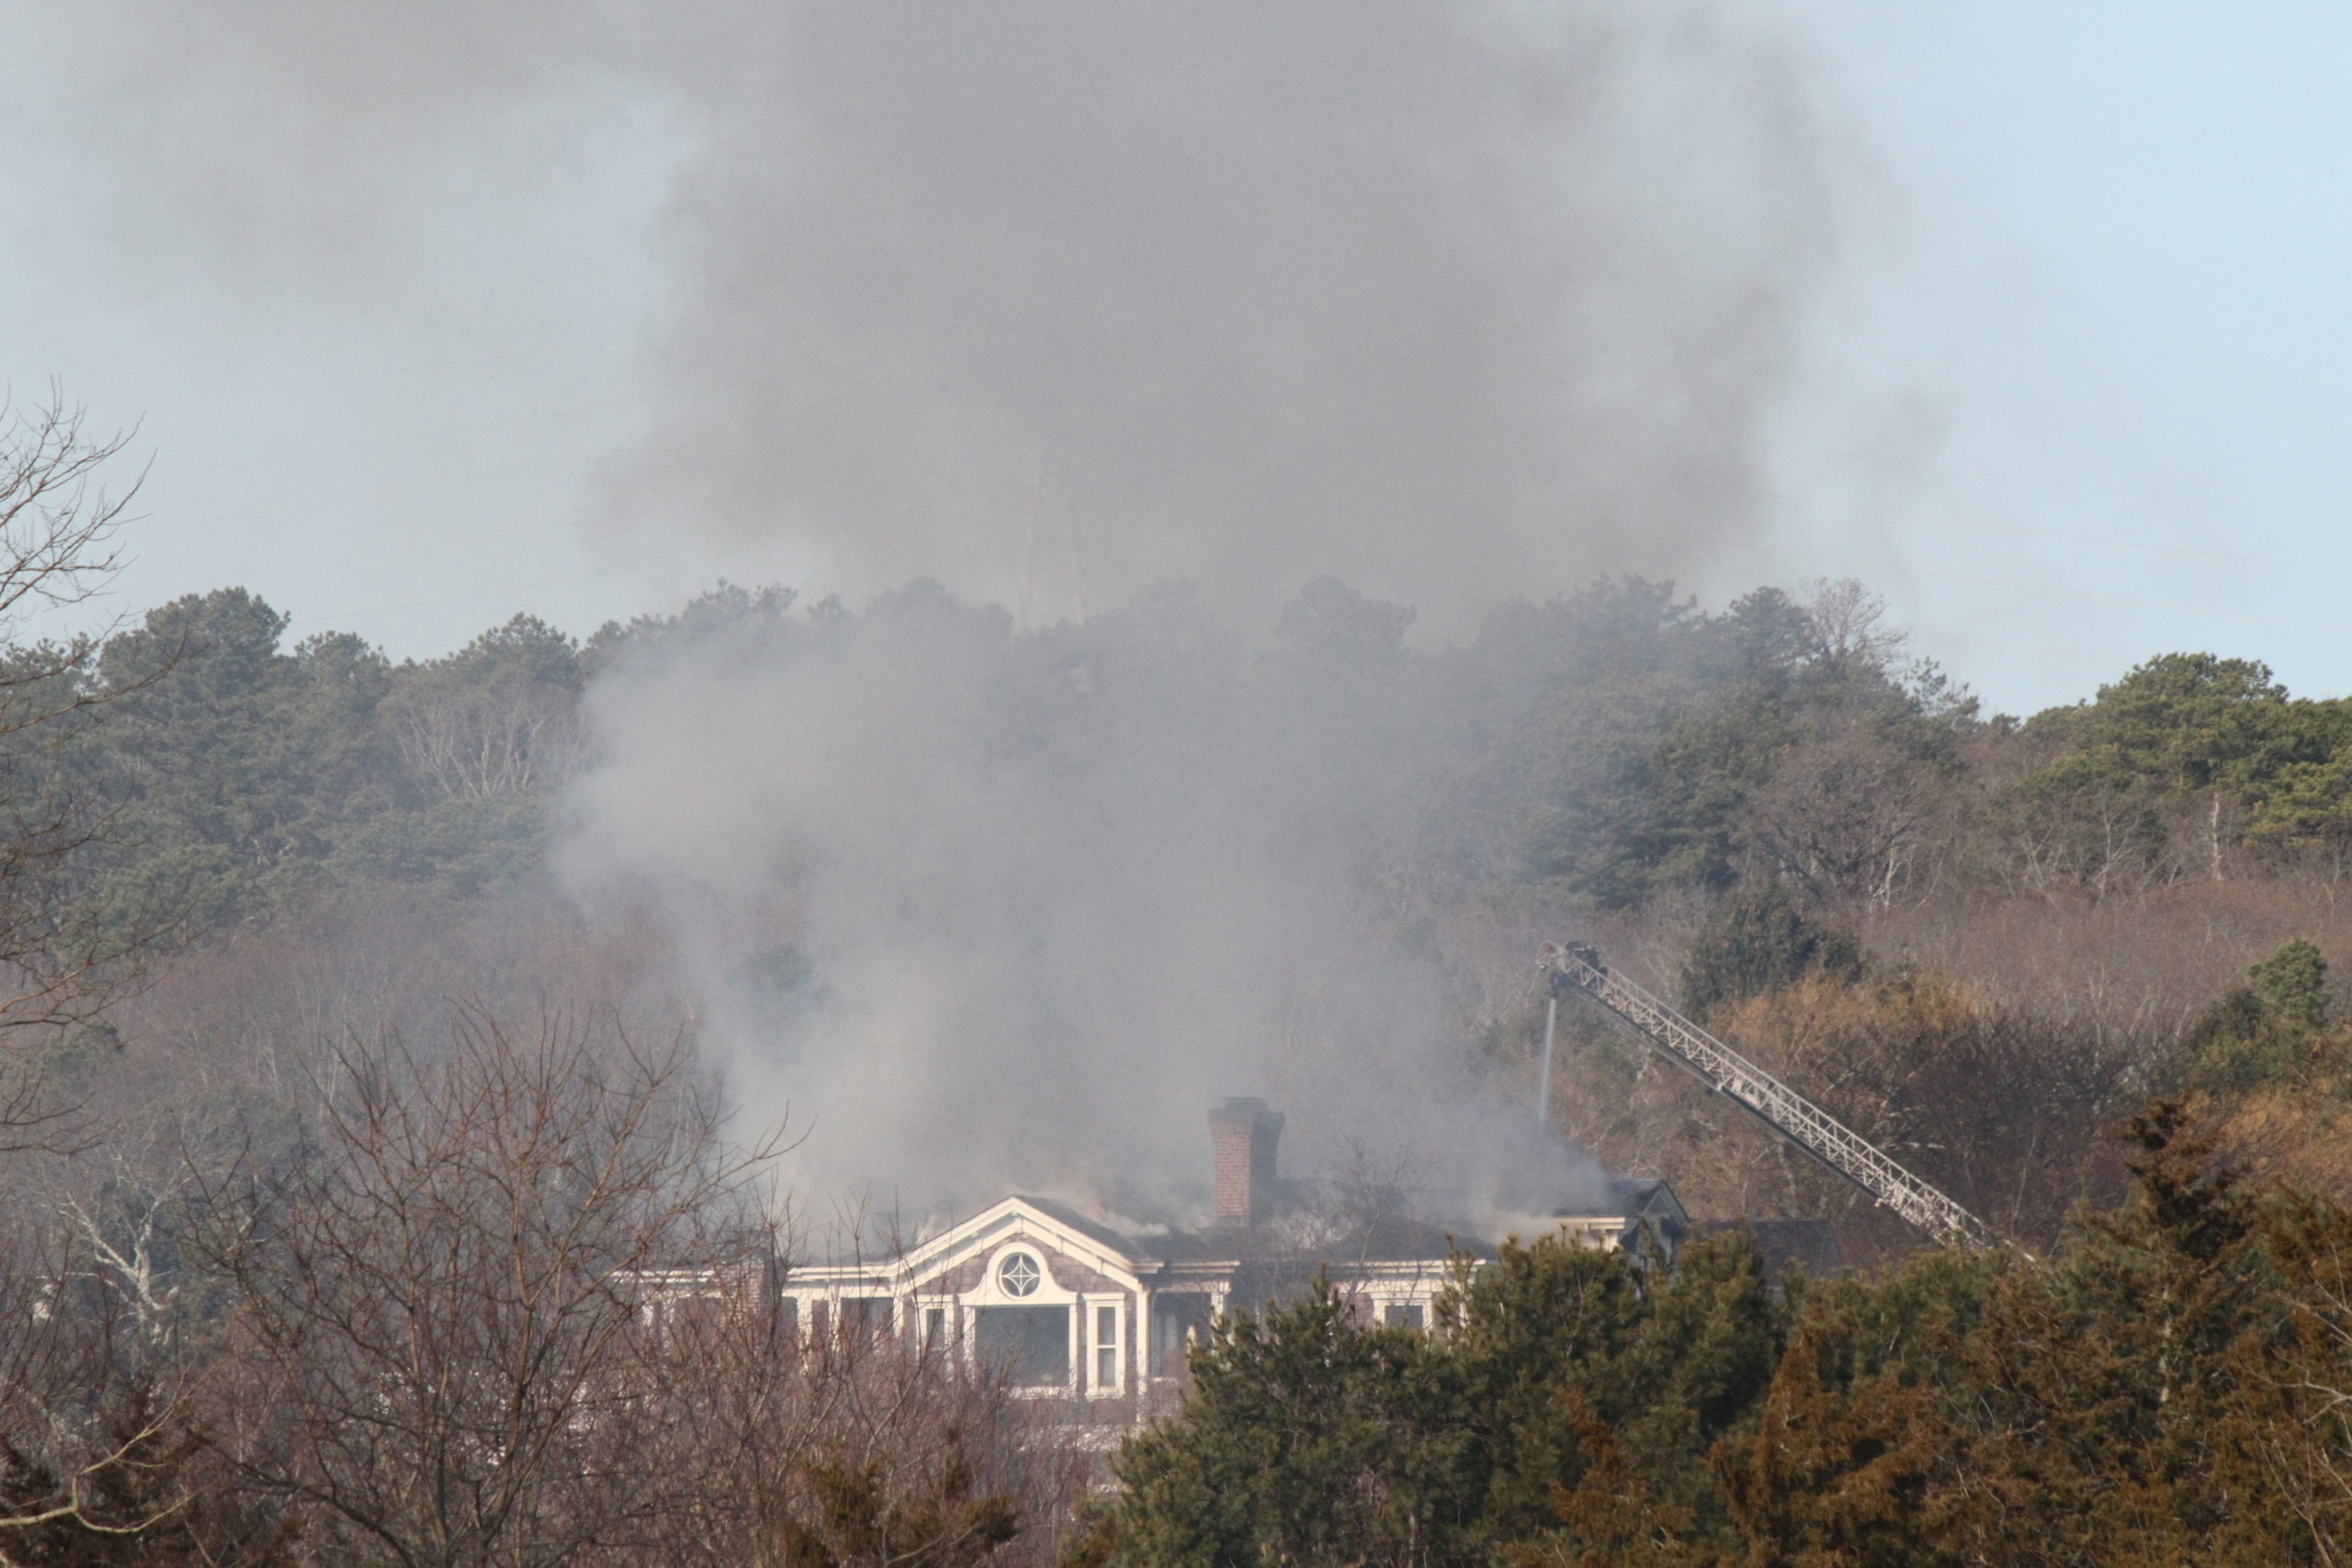 Fire destroyed a Water Mill mansion on Saturday morning. The house was on Little Noyac Path, which does not have fire hydrants, forcing fire crews from throughout the South Fork to rely on tanker trucks to supply the water needed to fight the flames. 